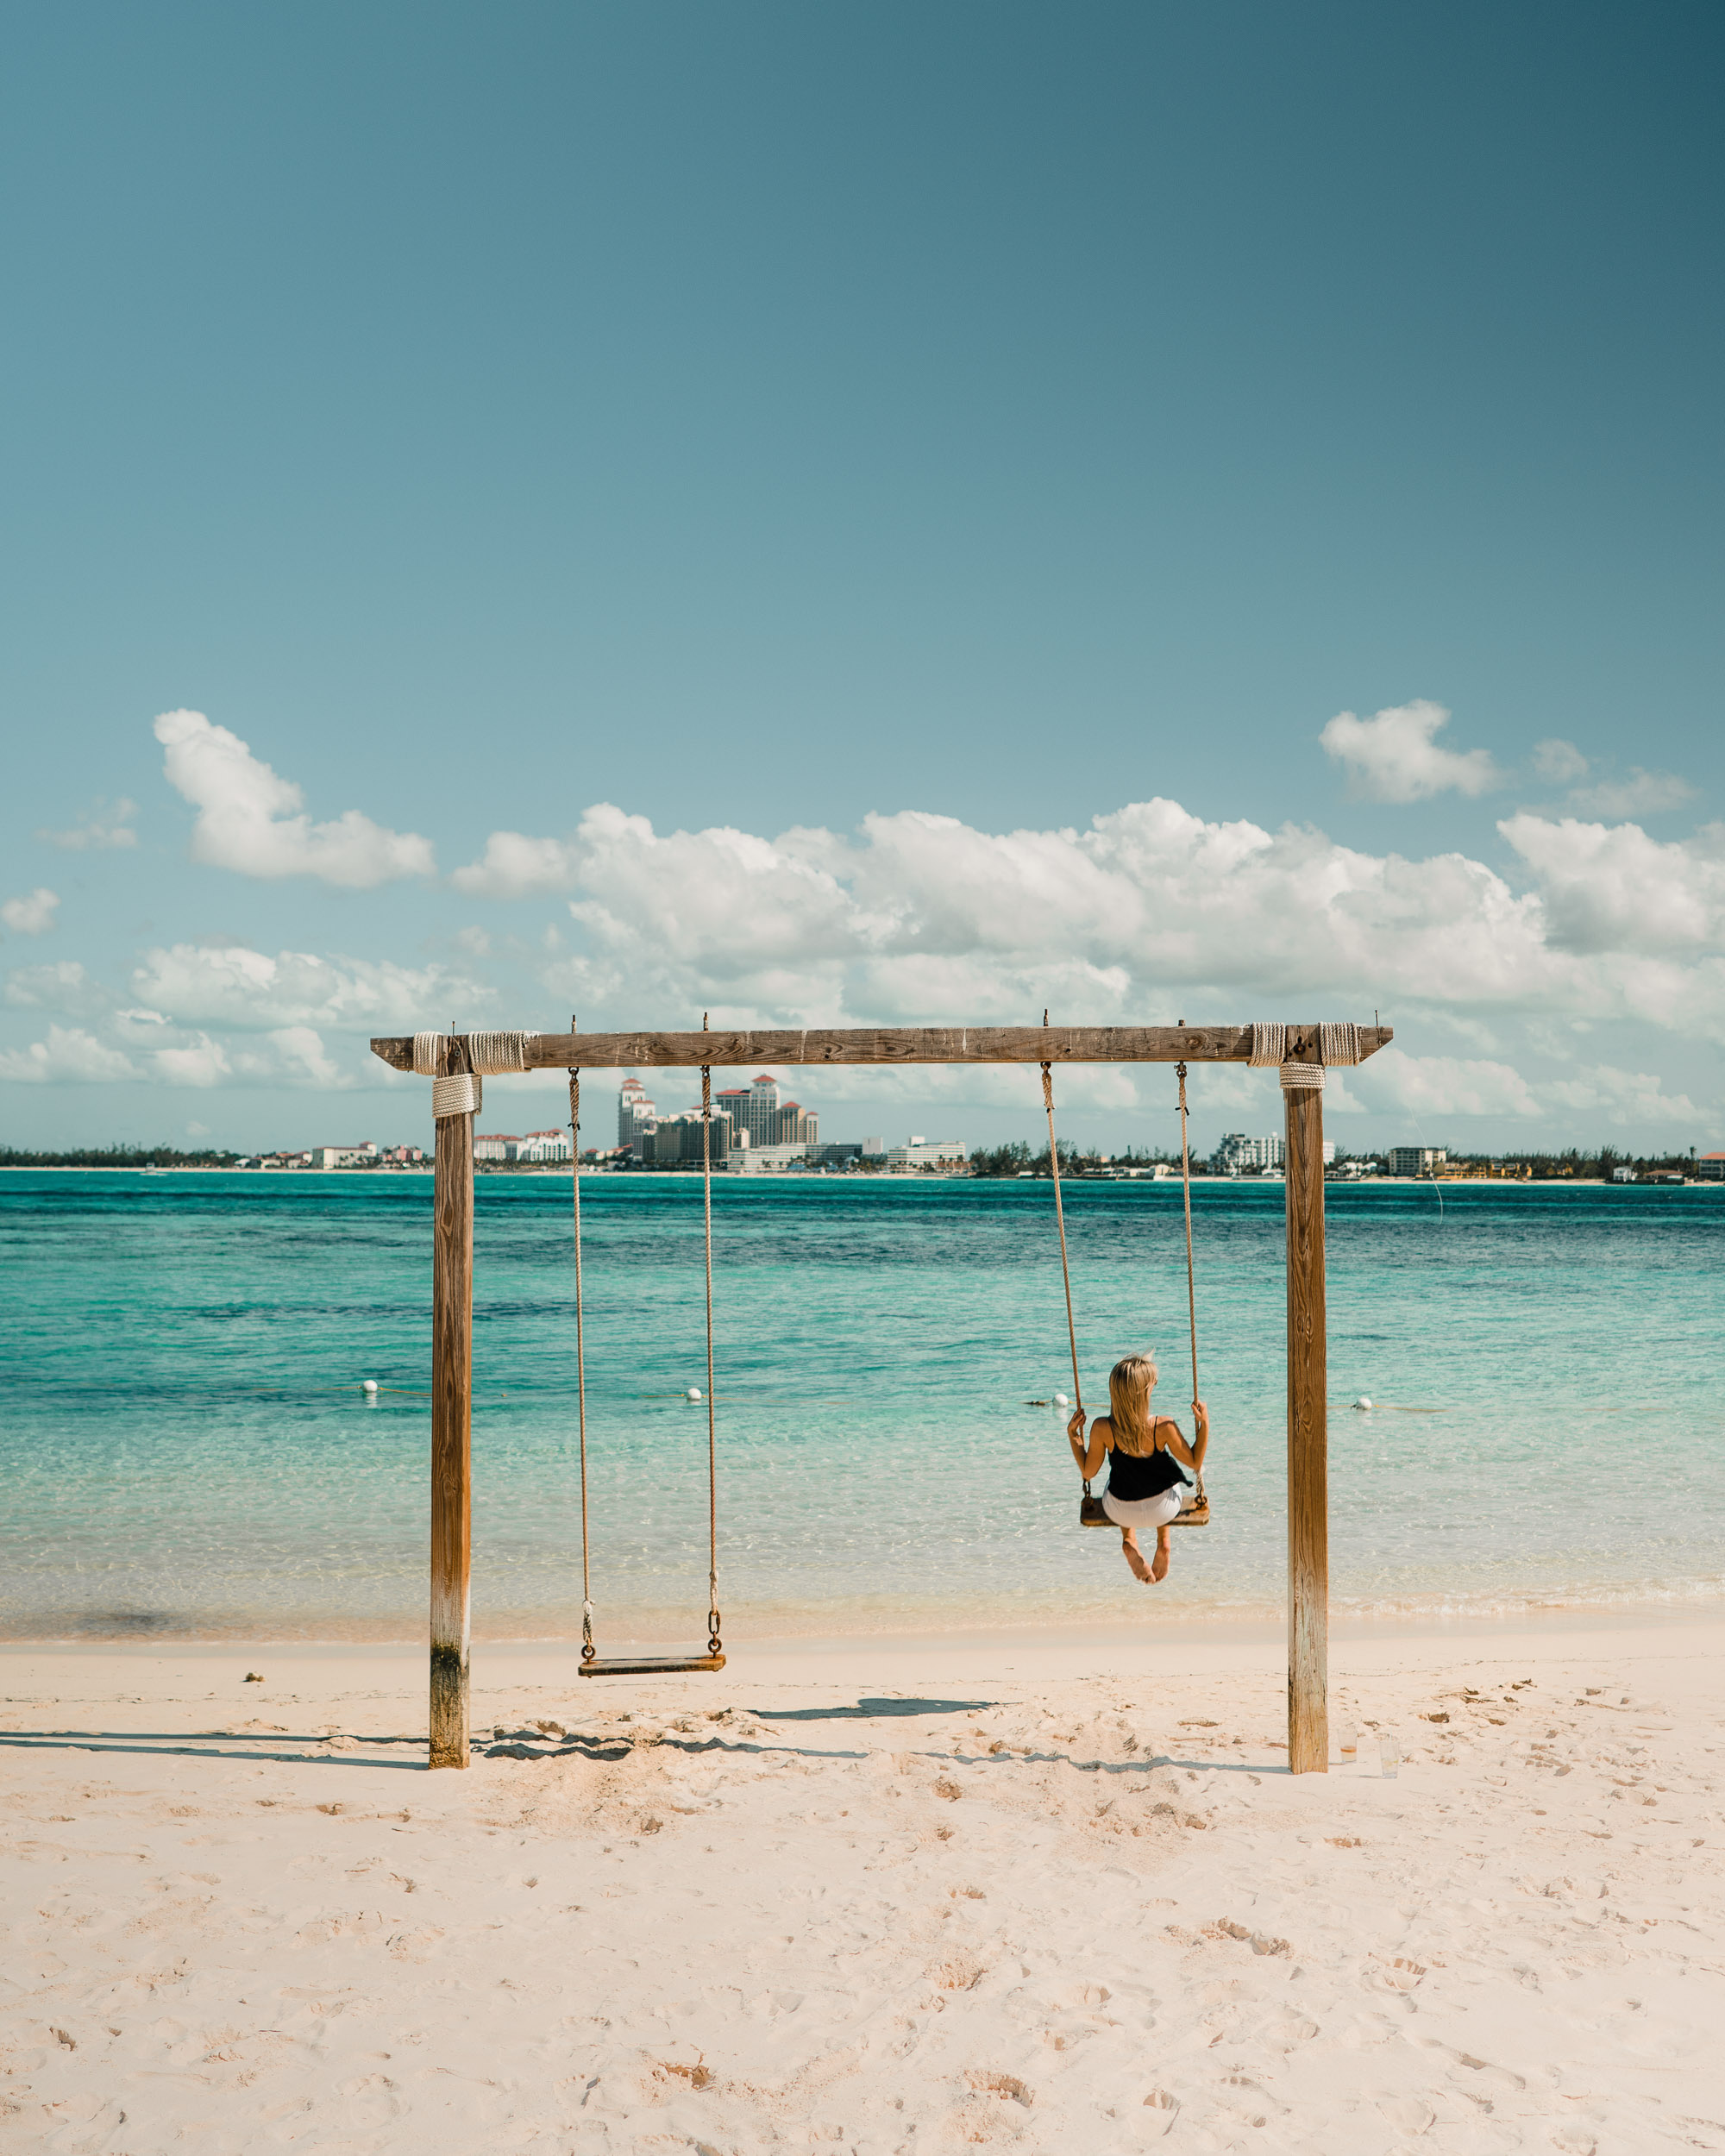 Swing on the water at Sandals private island resort in Nassau Bahamas